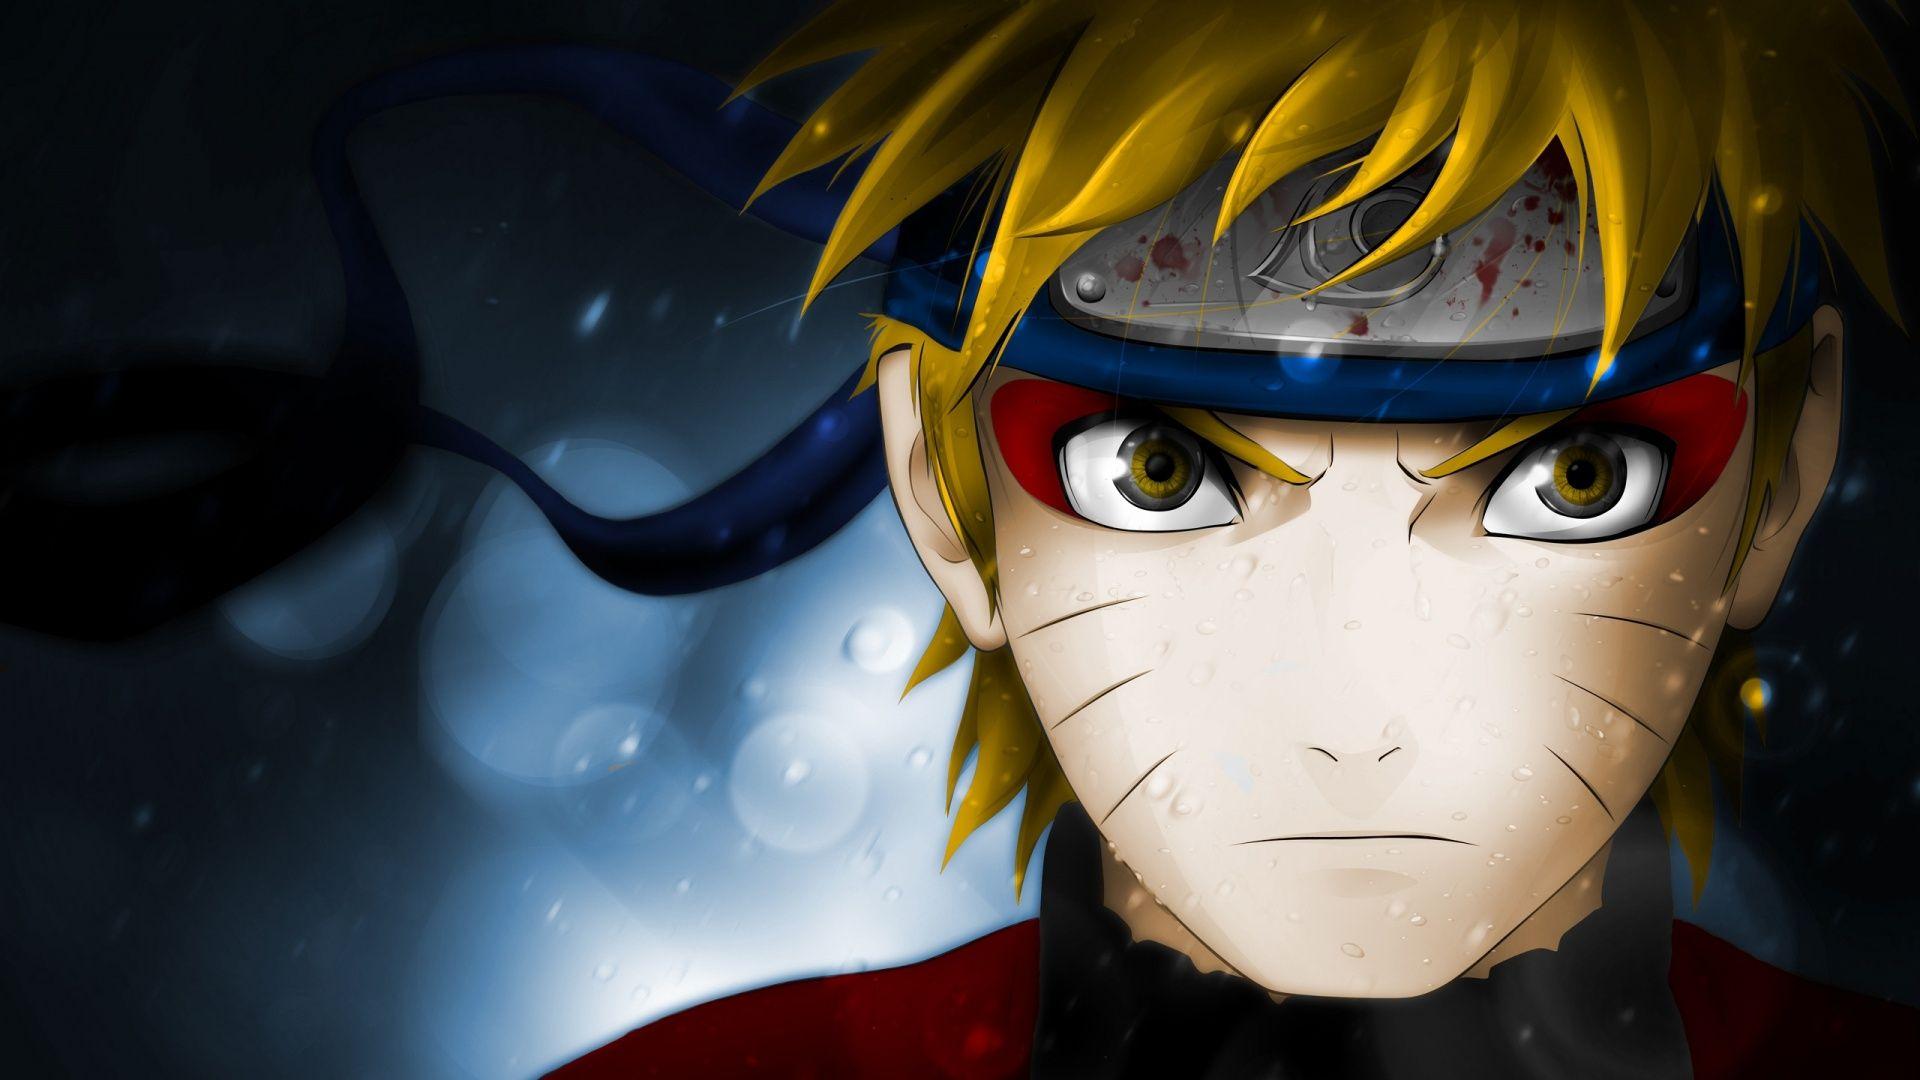 HD Naruto Wallpaper for Smartphone and Computer